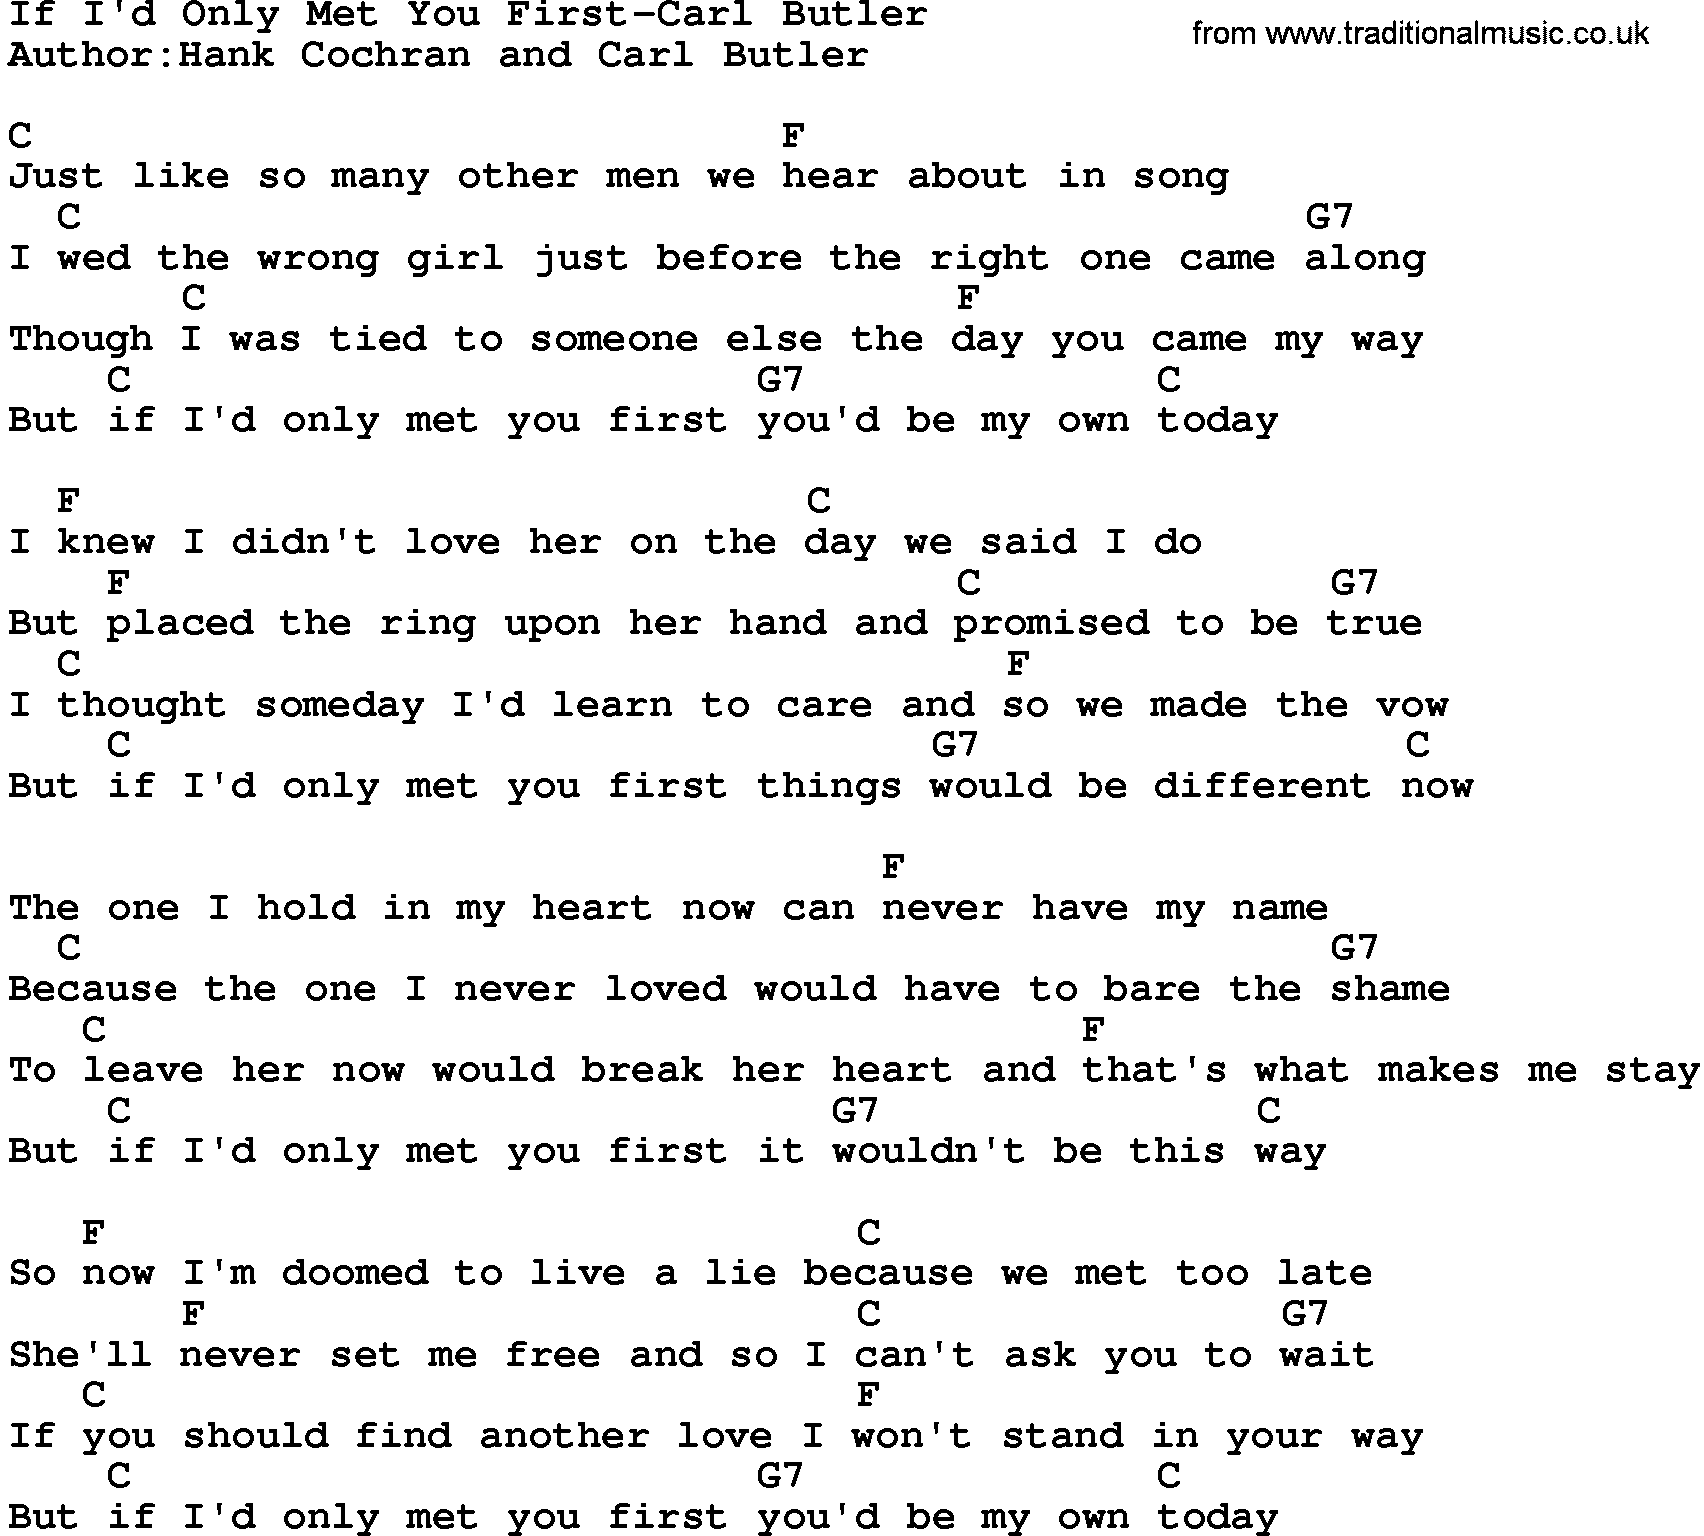 Country music song: If I'd Only Met You First-Carl Butler lyrics and chords